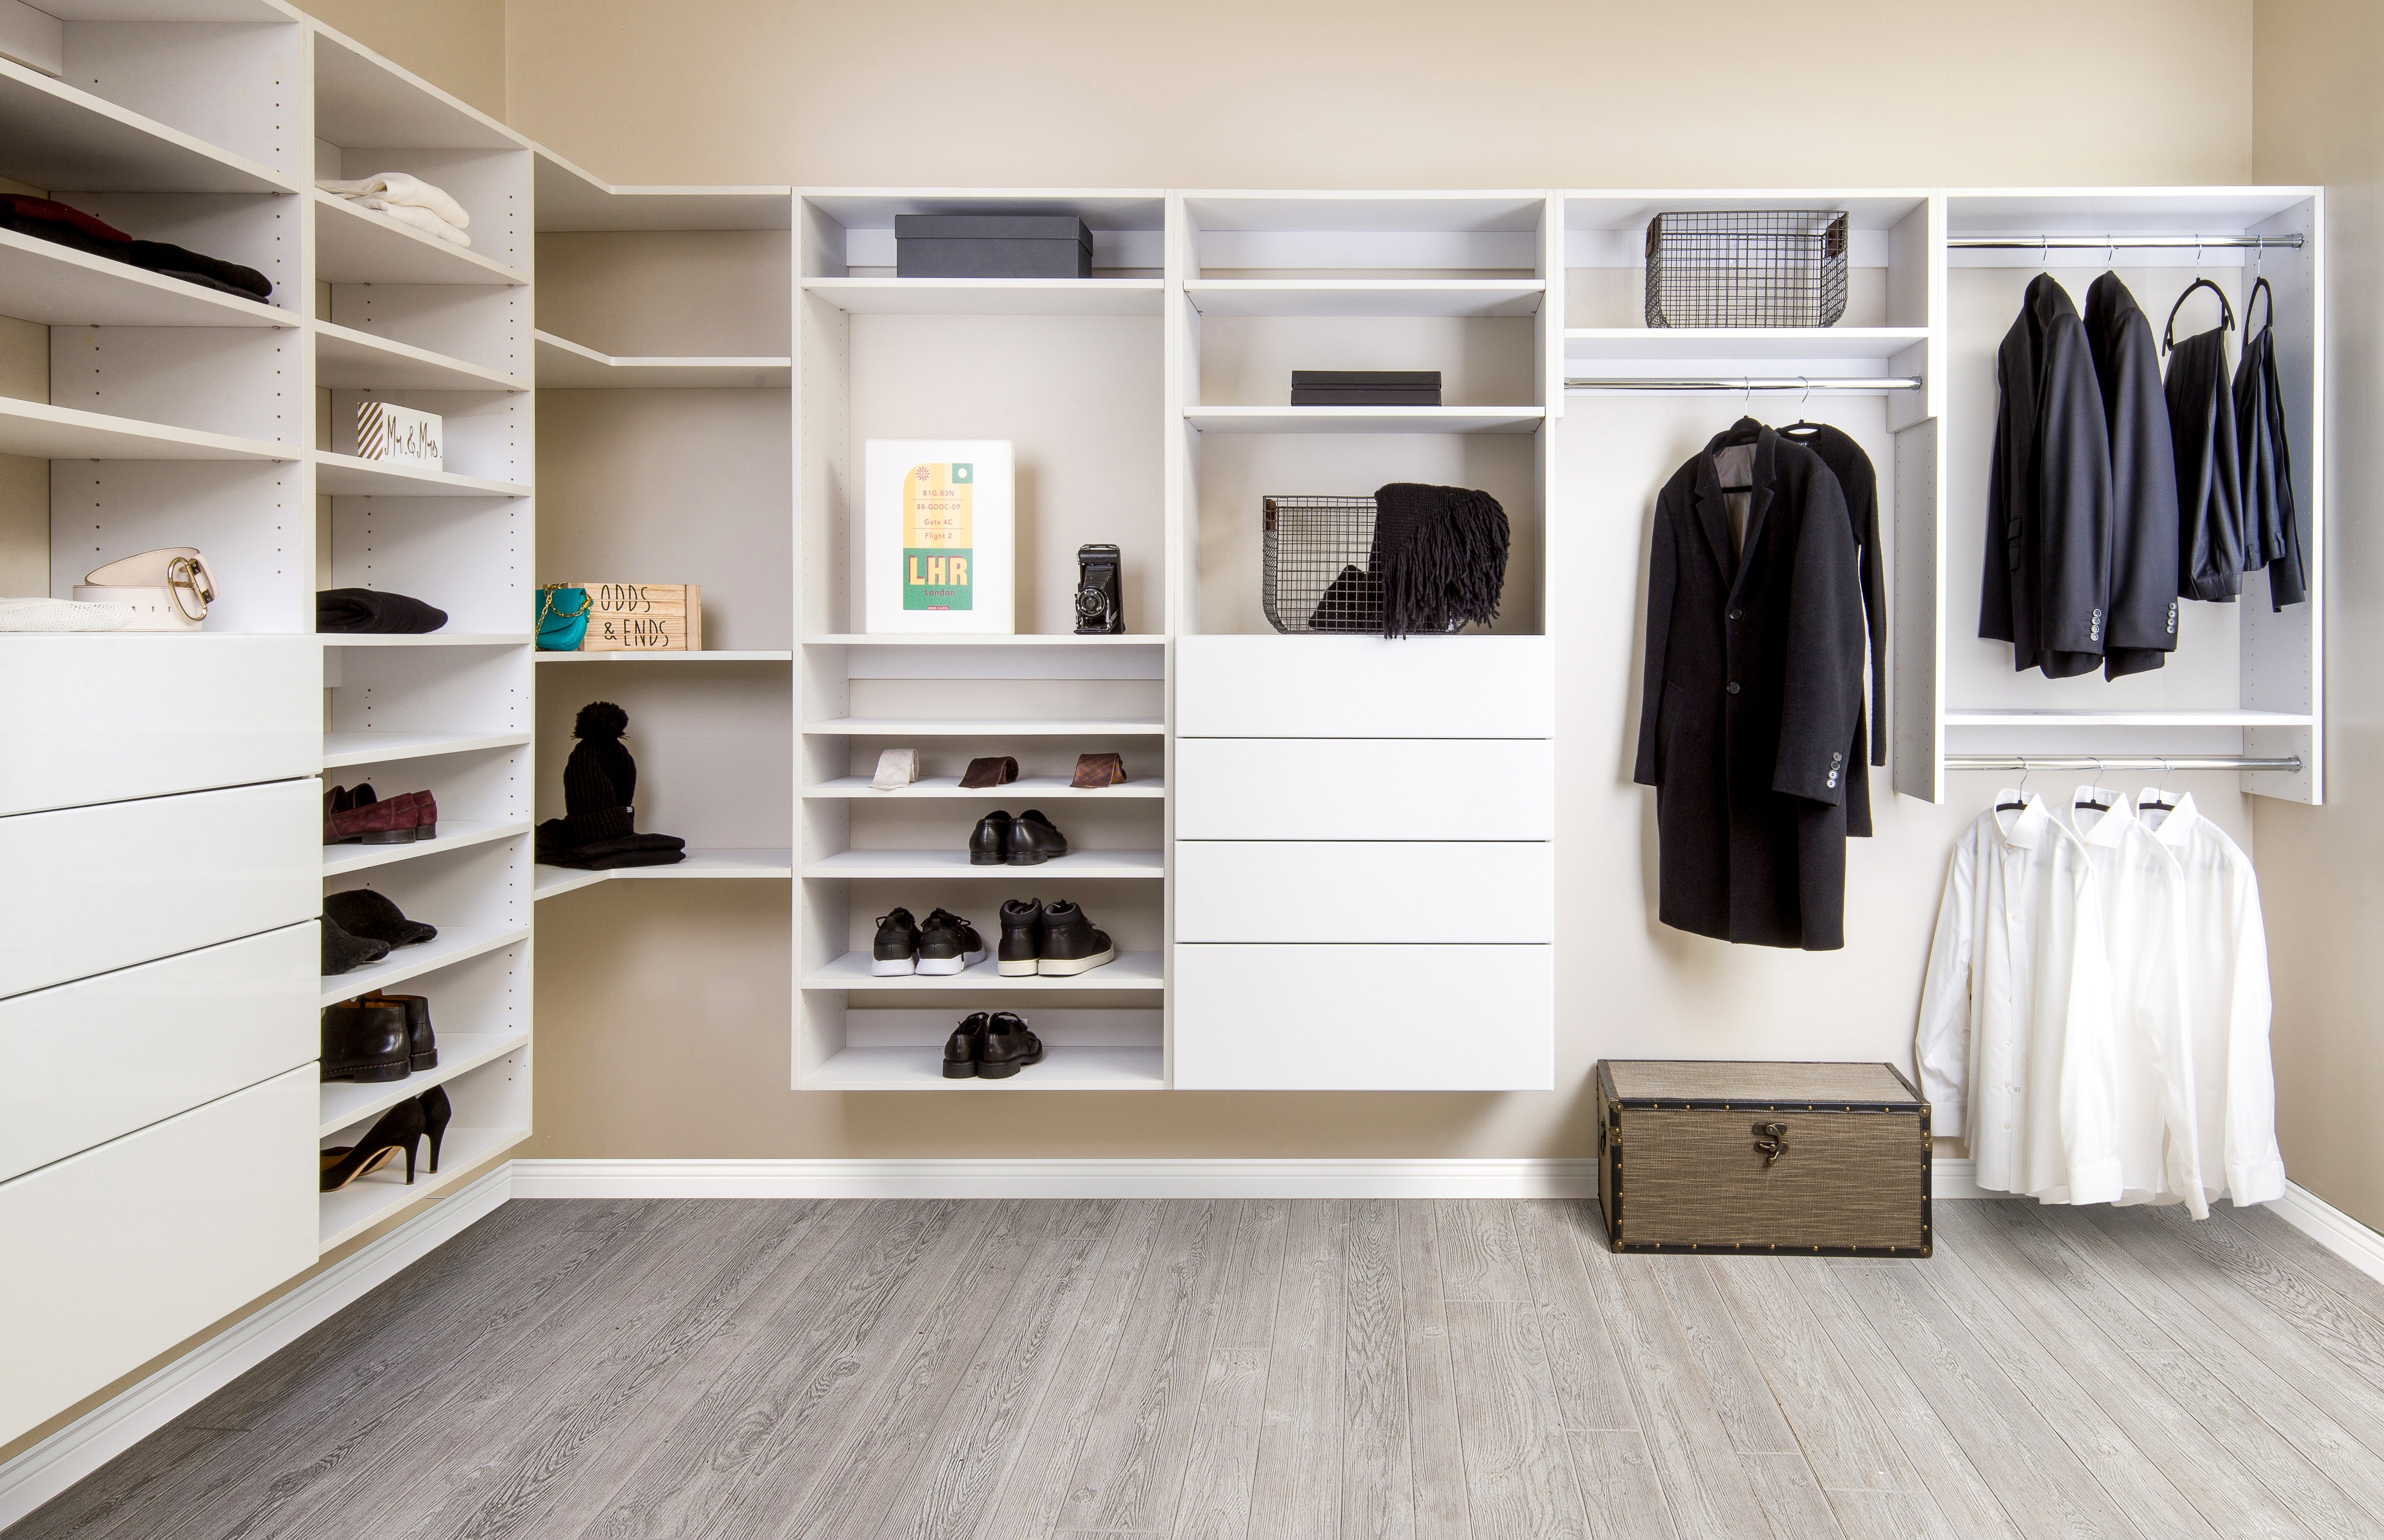 Walk In Closet Designs For A Master Bedroom